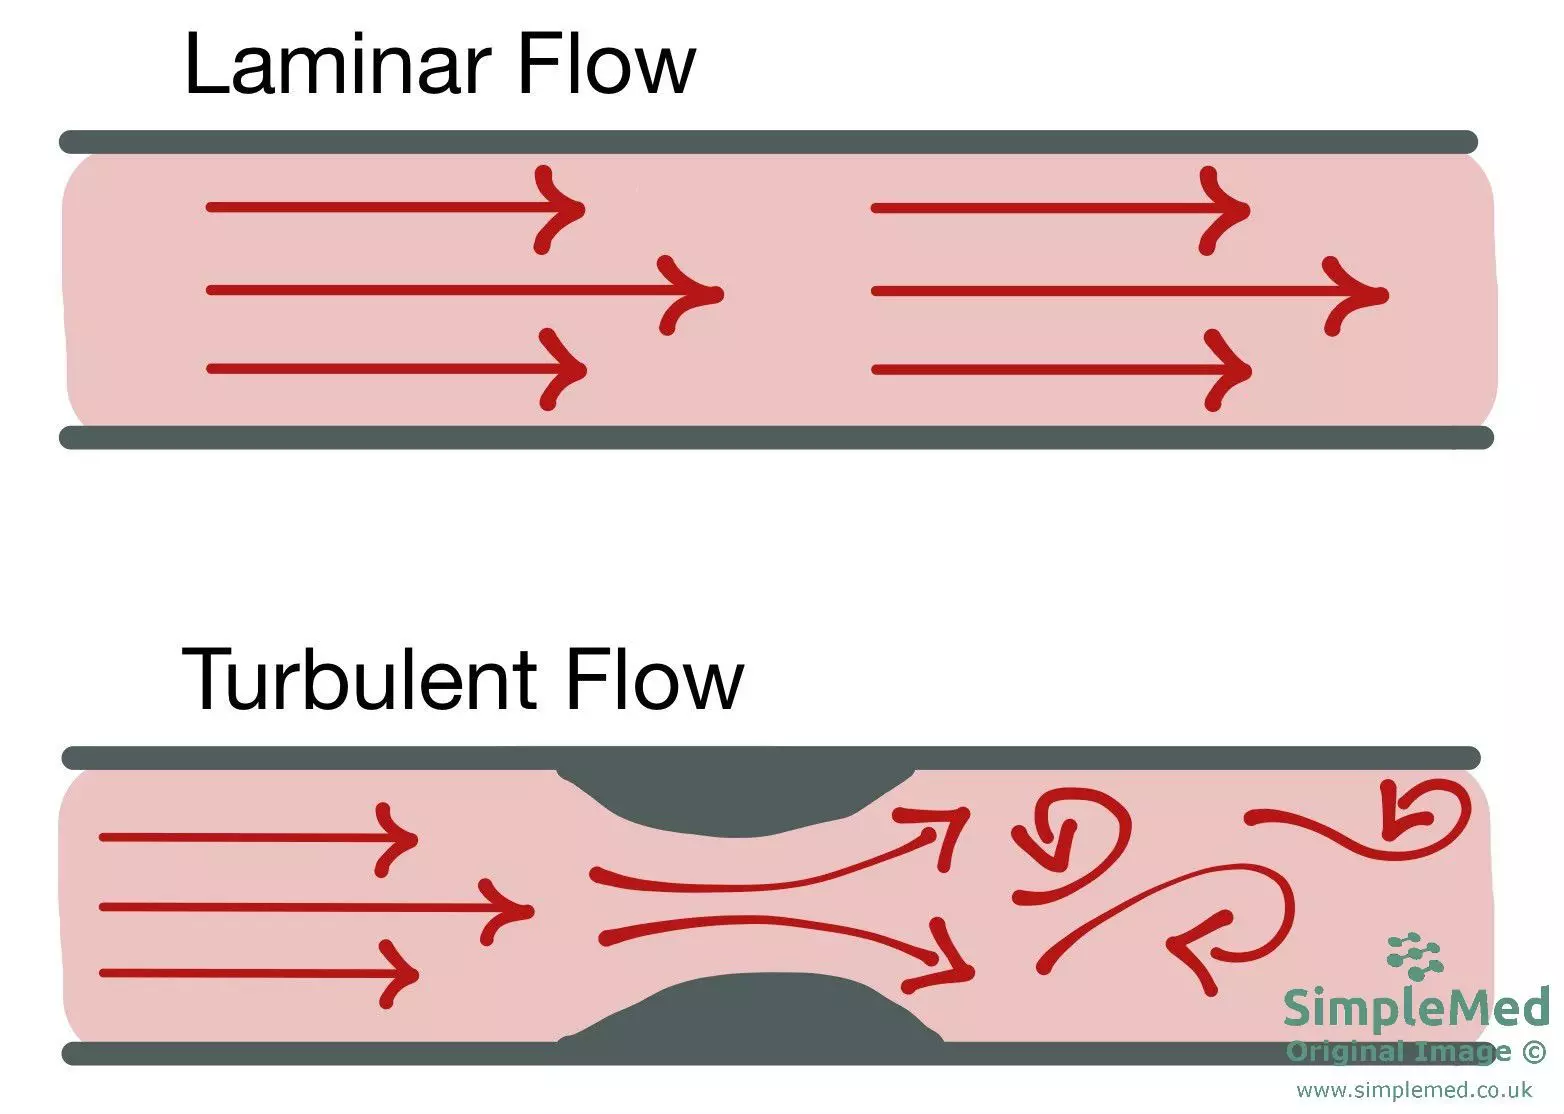 Blood flow in blood vessels - Laminar and Turbulent flow SimpleMed